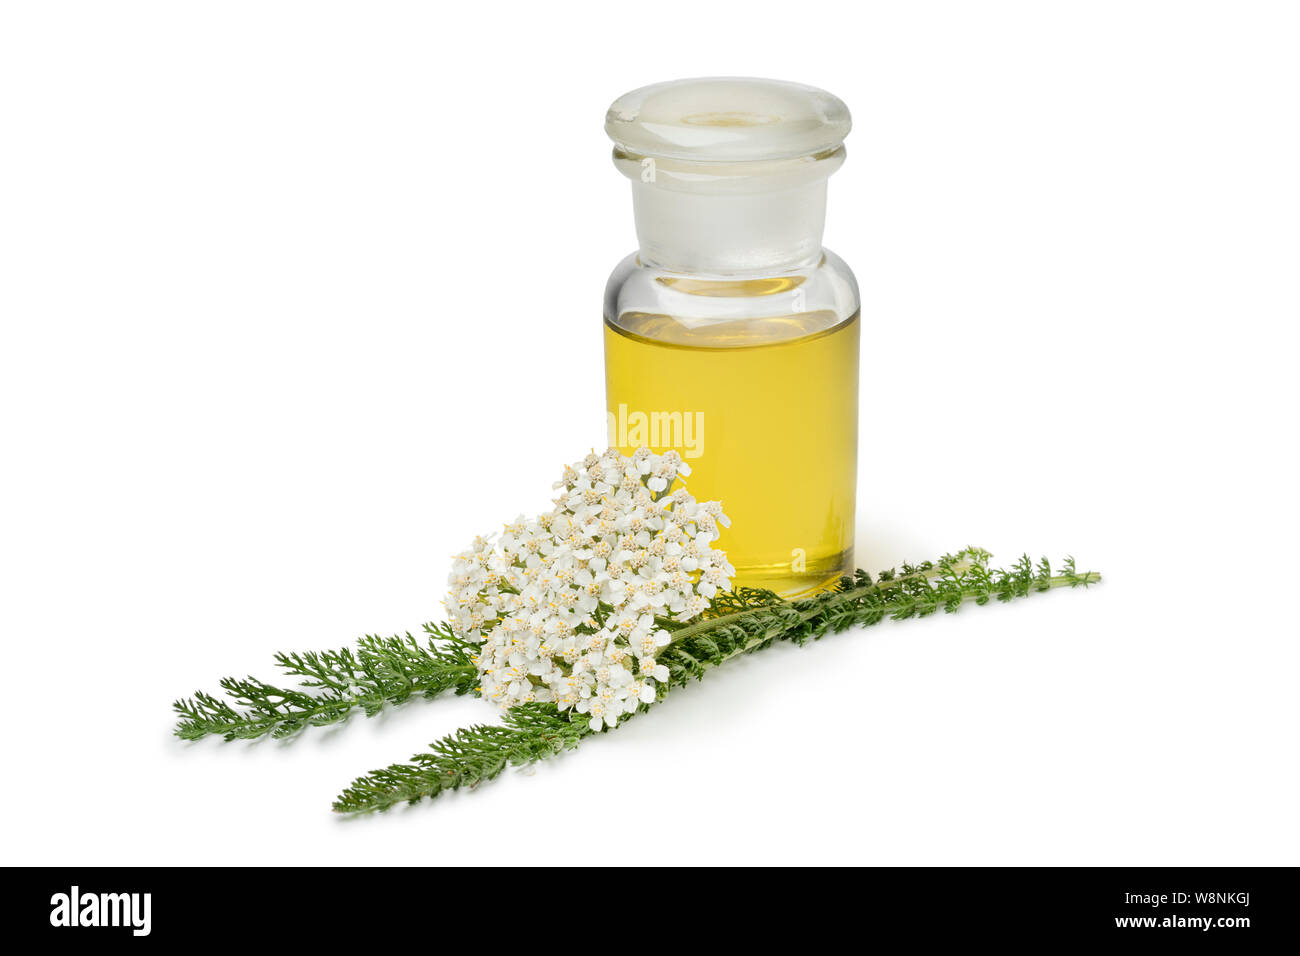 Bottle of yarrow oil and fresh white Common yarrow flowers isolated on white background Stock Photo